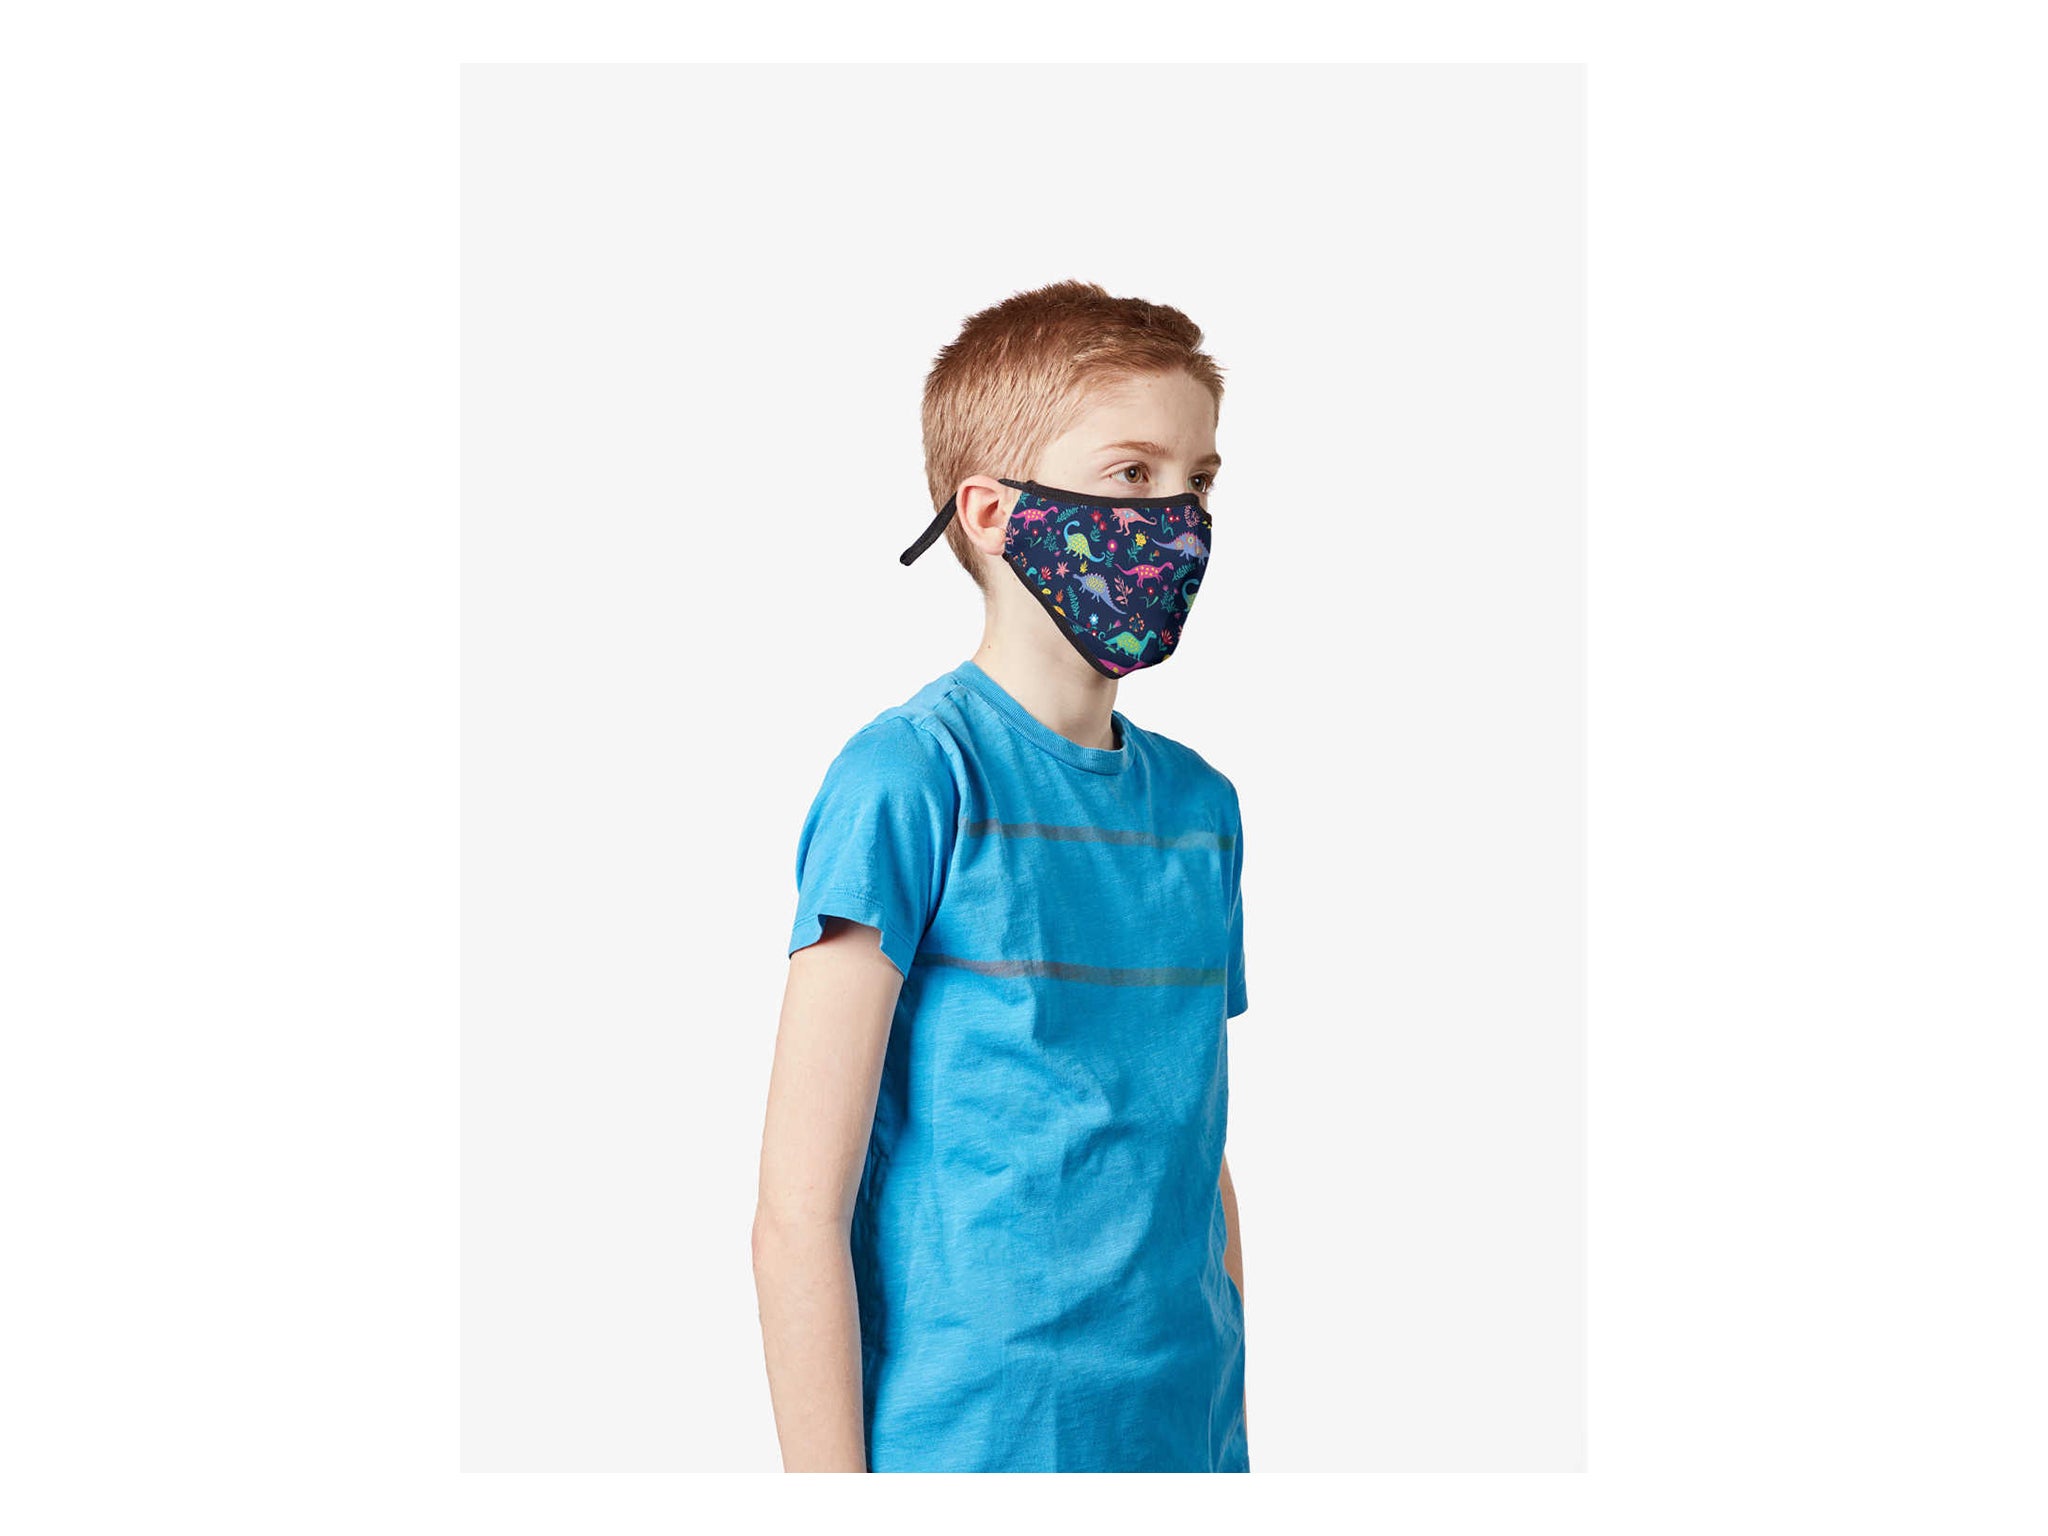 Vistaprint?has?made masks?available for adults and kids